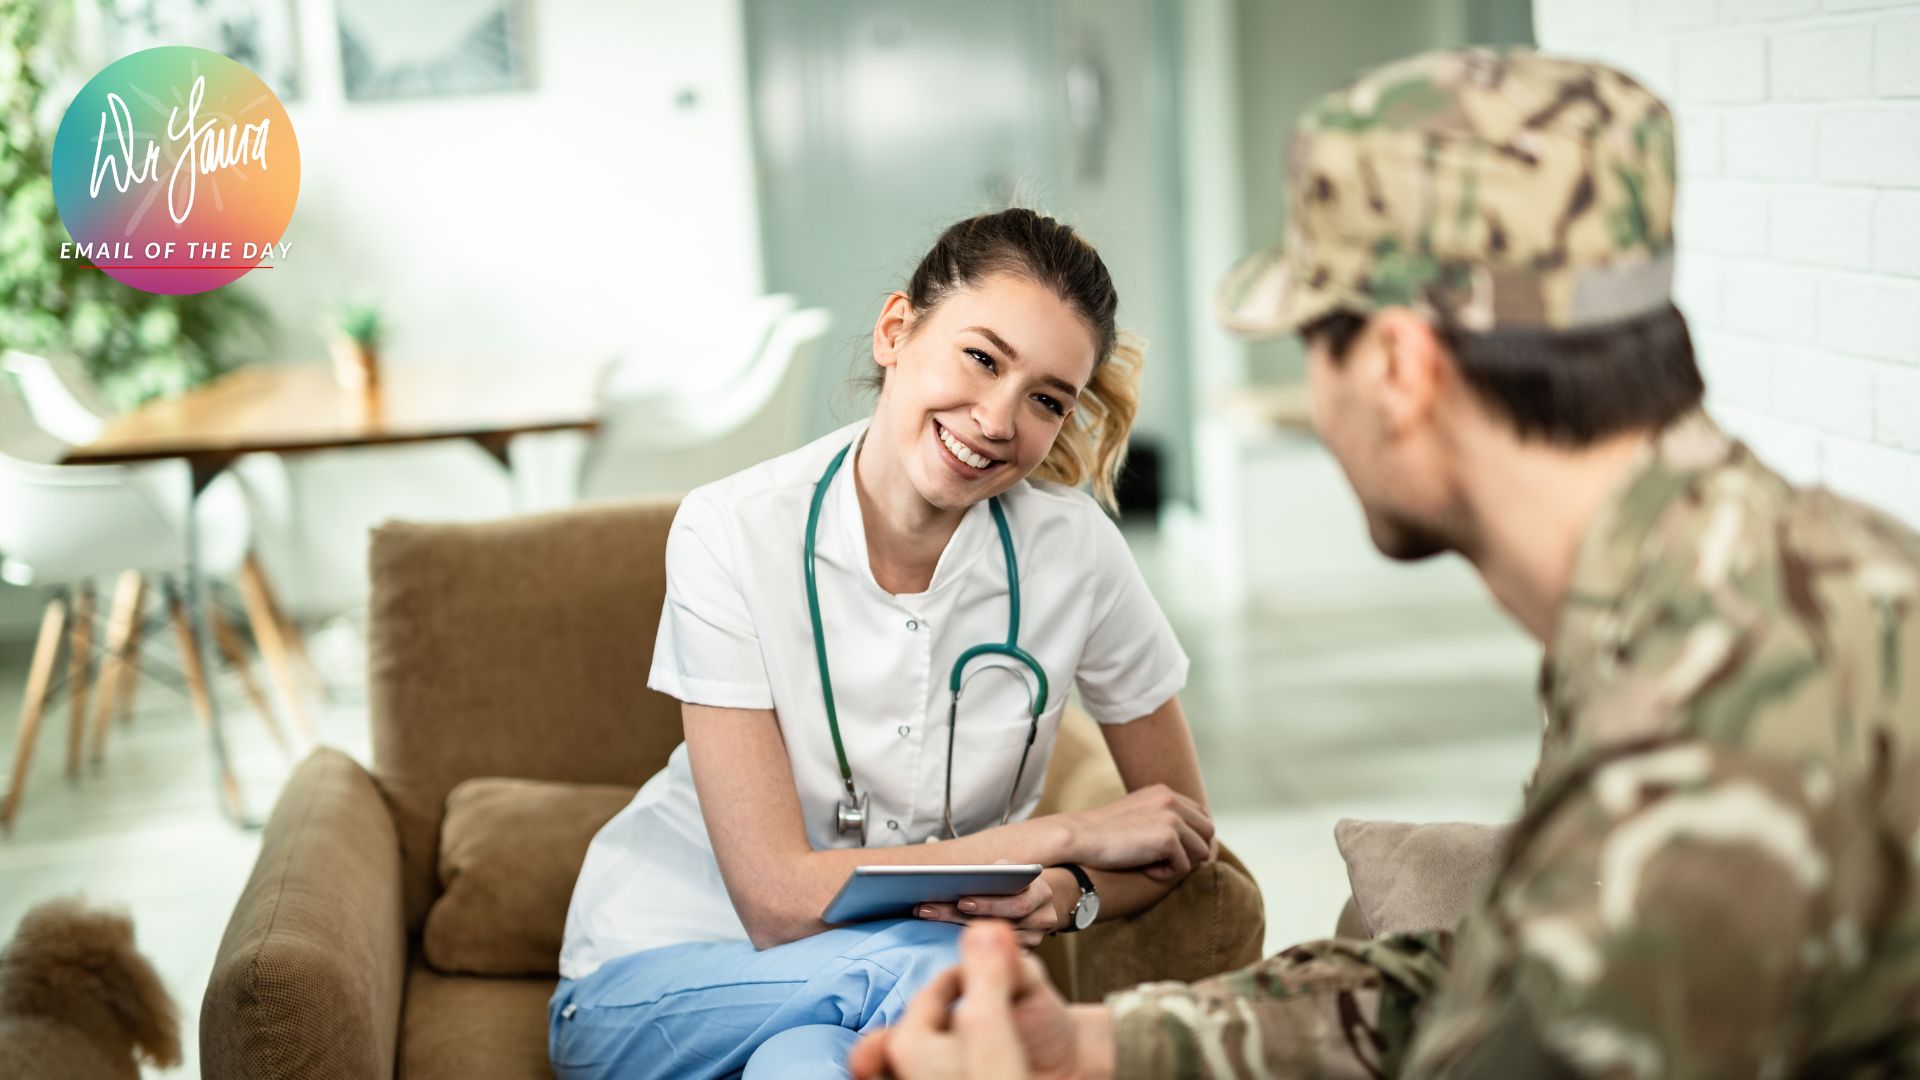 Female nurse smiles and sits on armchair while looking at man in uniform